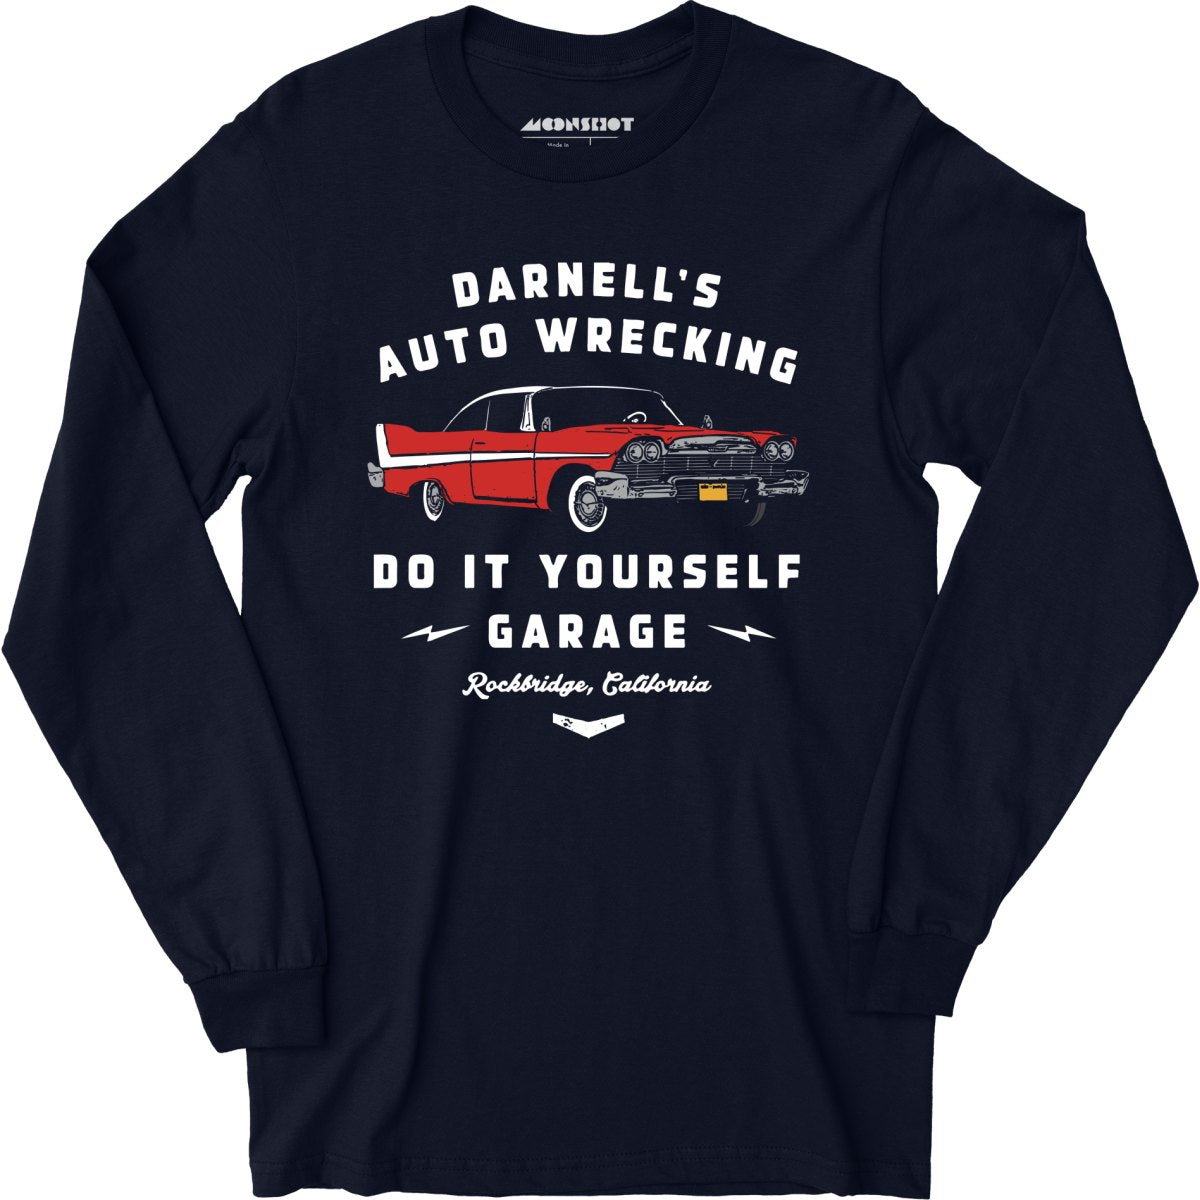 Darnell's Auto Wrecking - Do it Yourself Garage - Long Sleeve T-Shirt